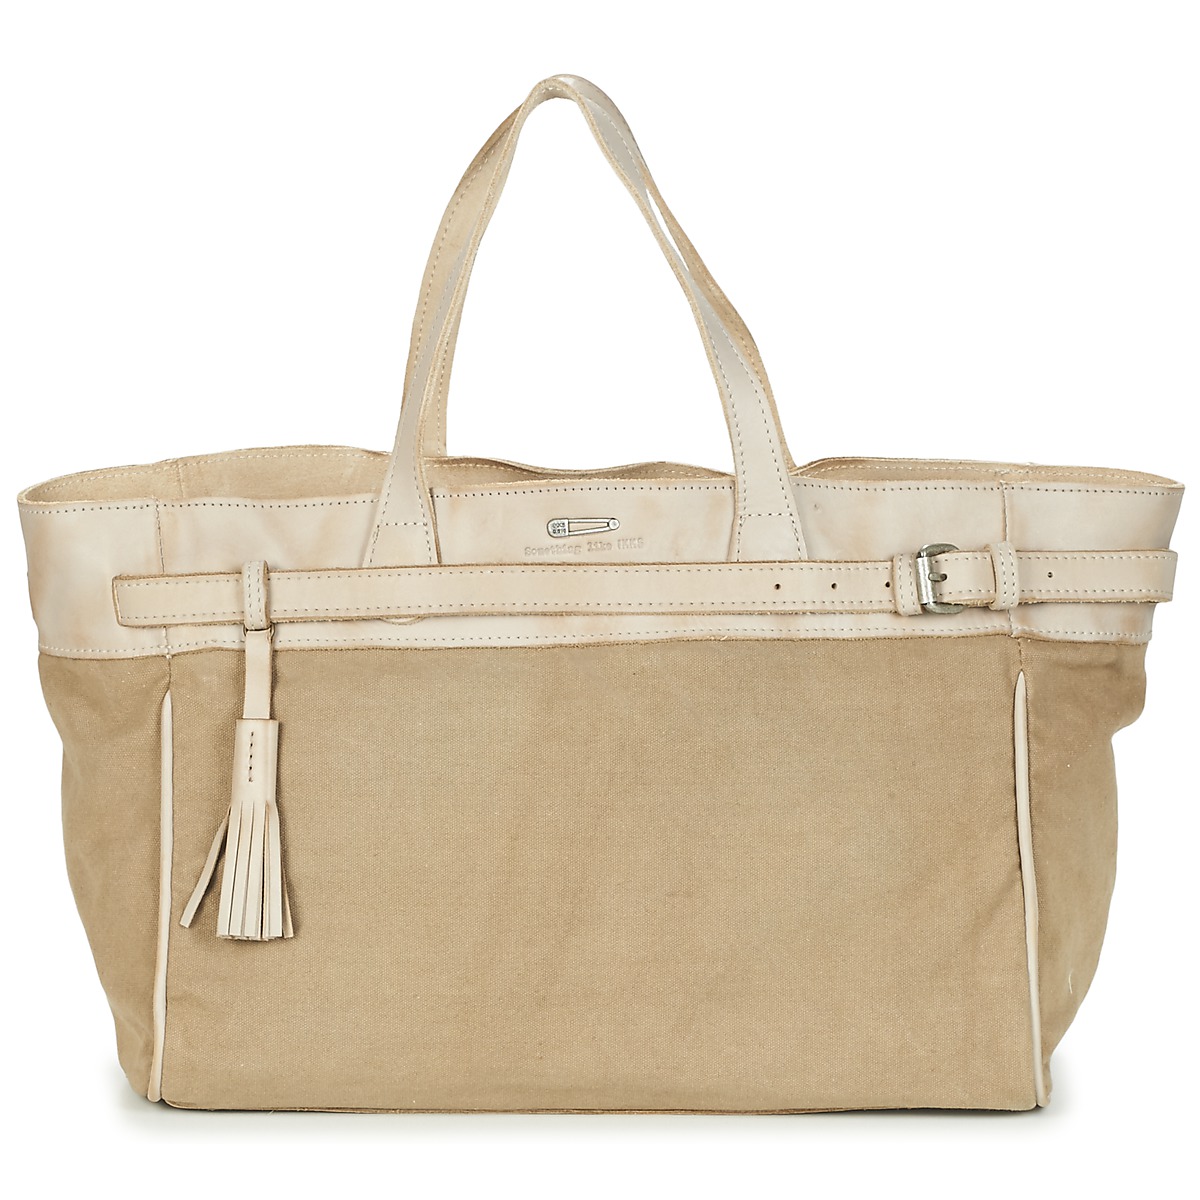 Cabas / Sac shopping Ikks THE SOLDIER Beige